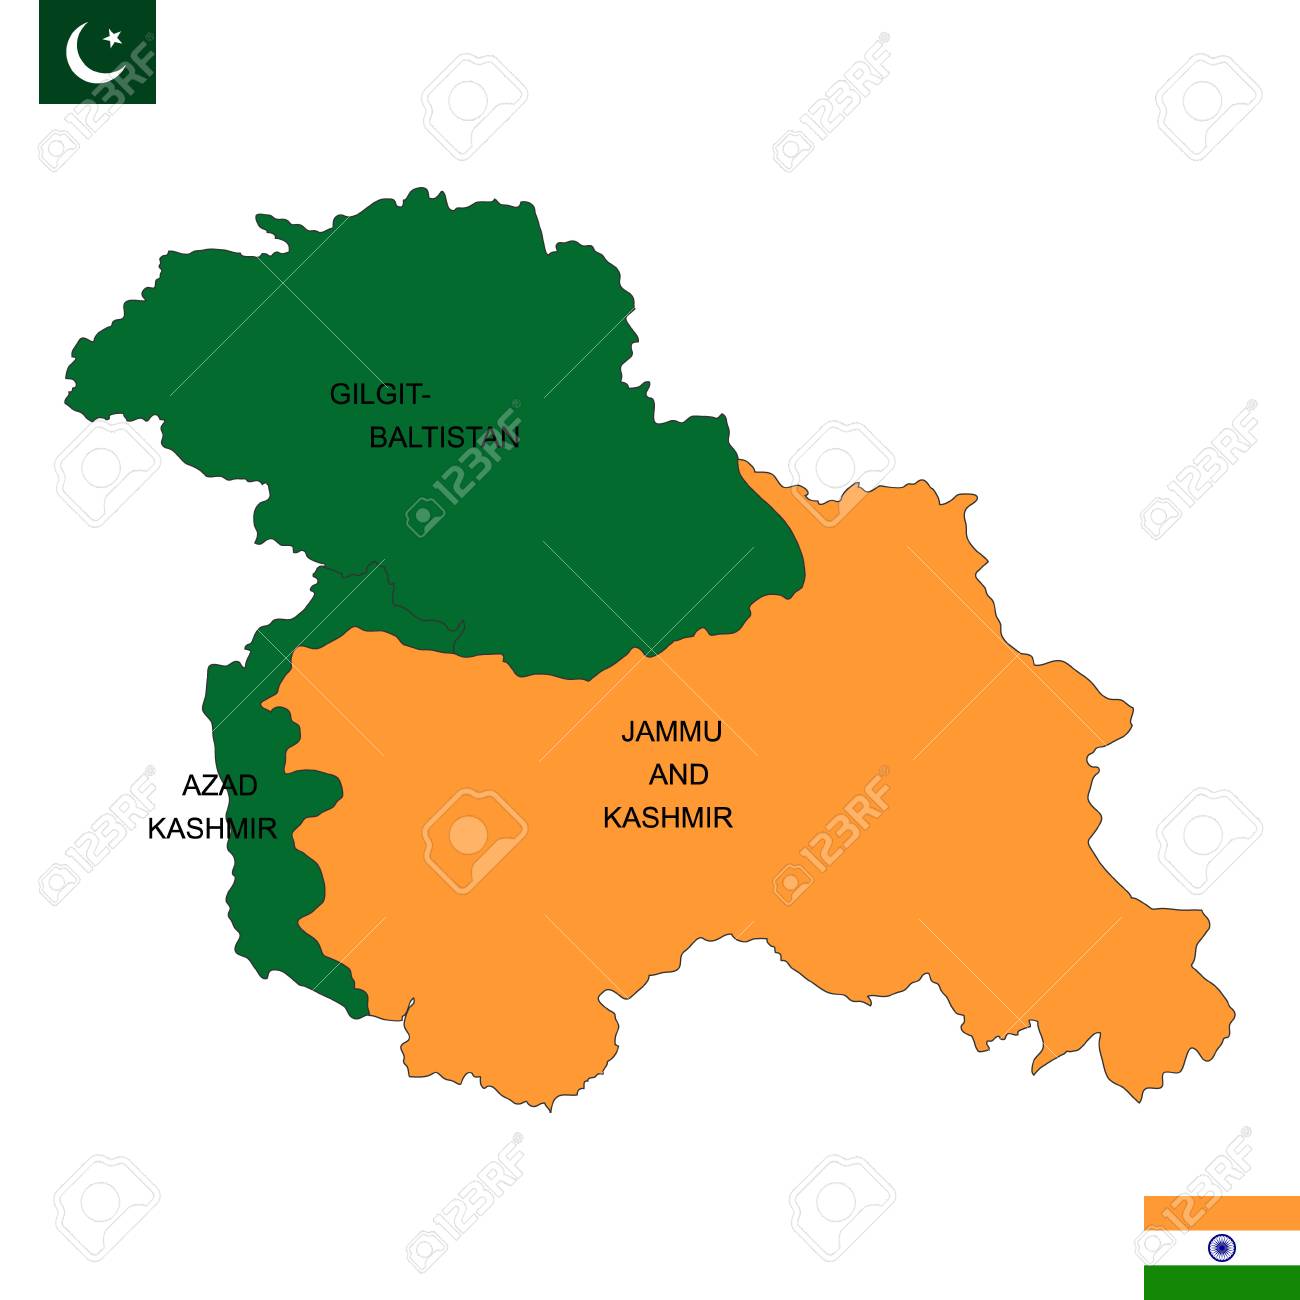 124599467-map-of-kashmir-is-a-geographical-region-of-the-indian-subcontinent.jpg